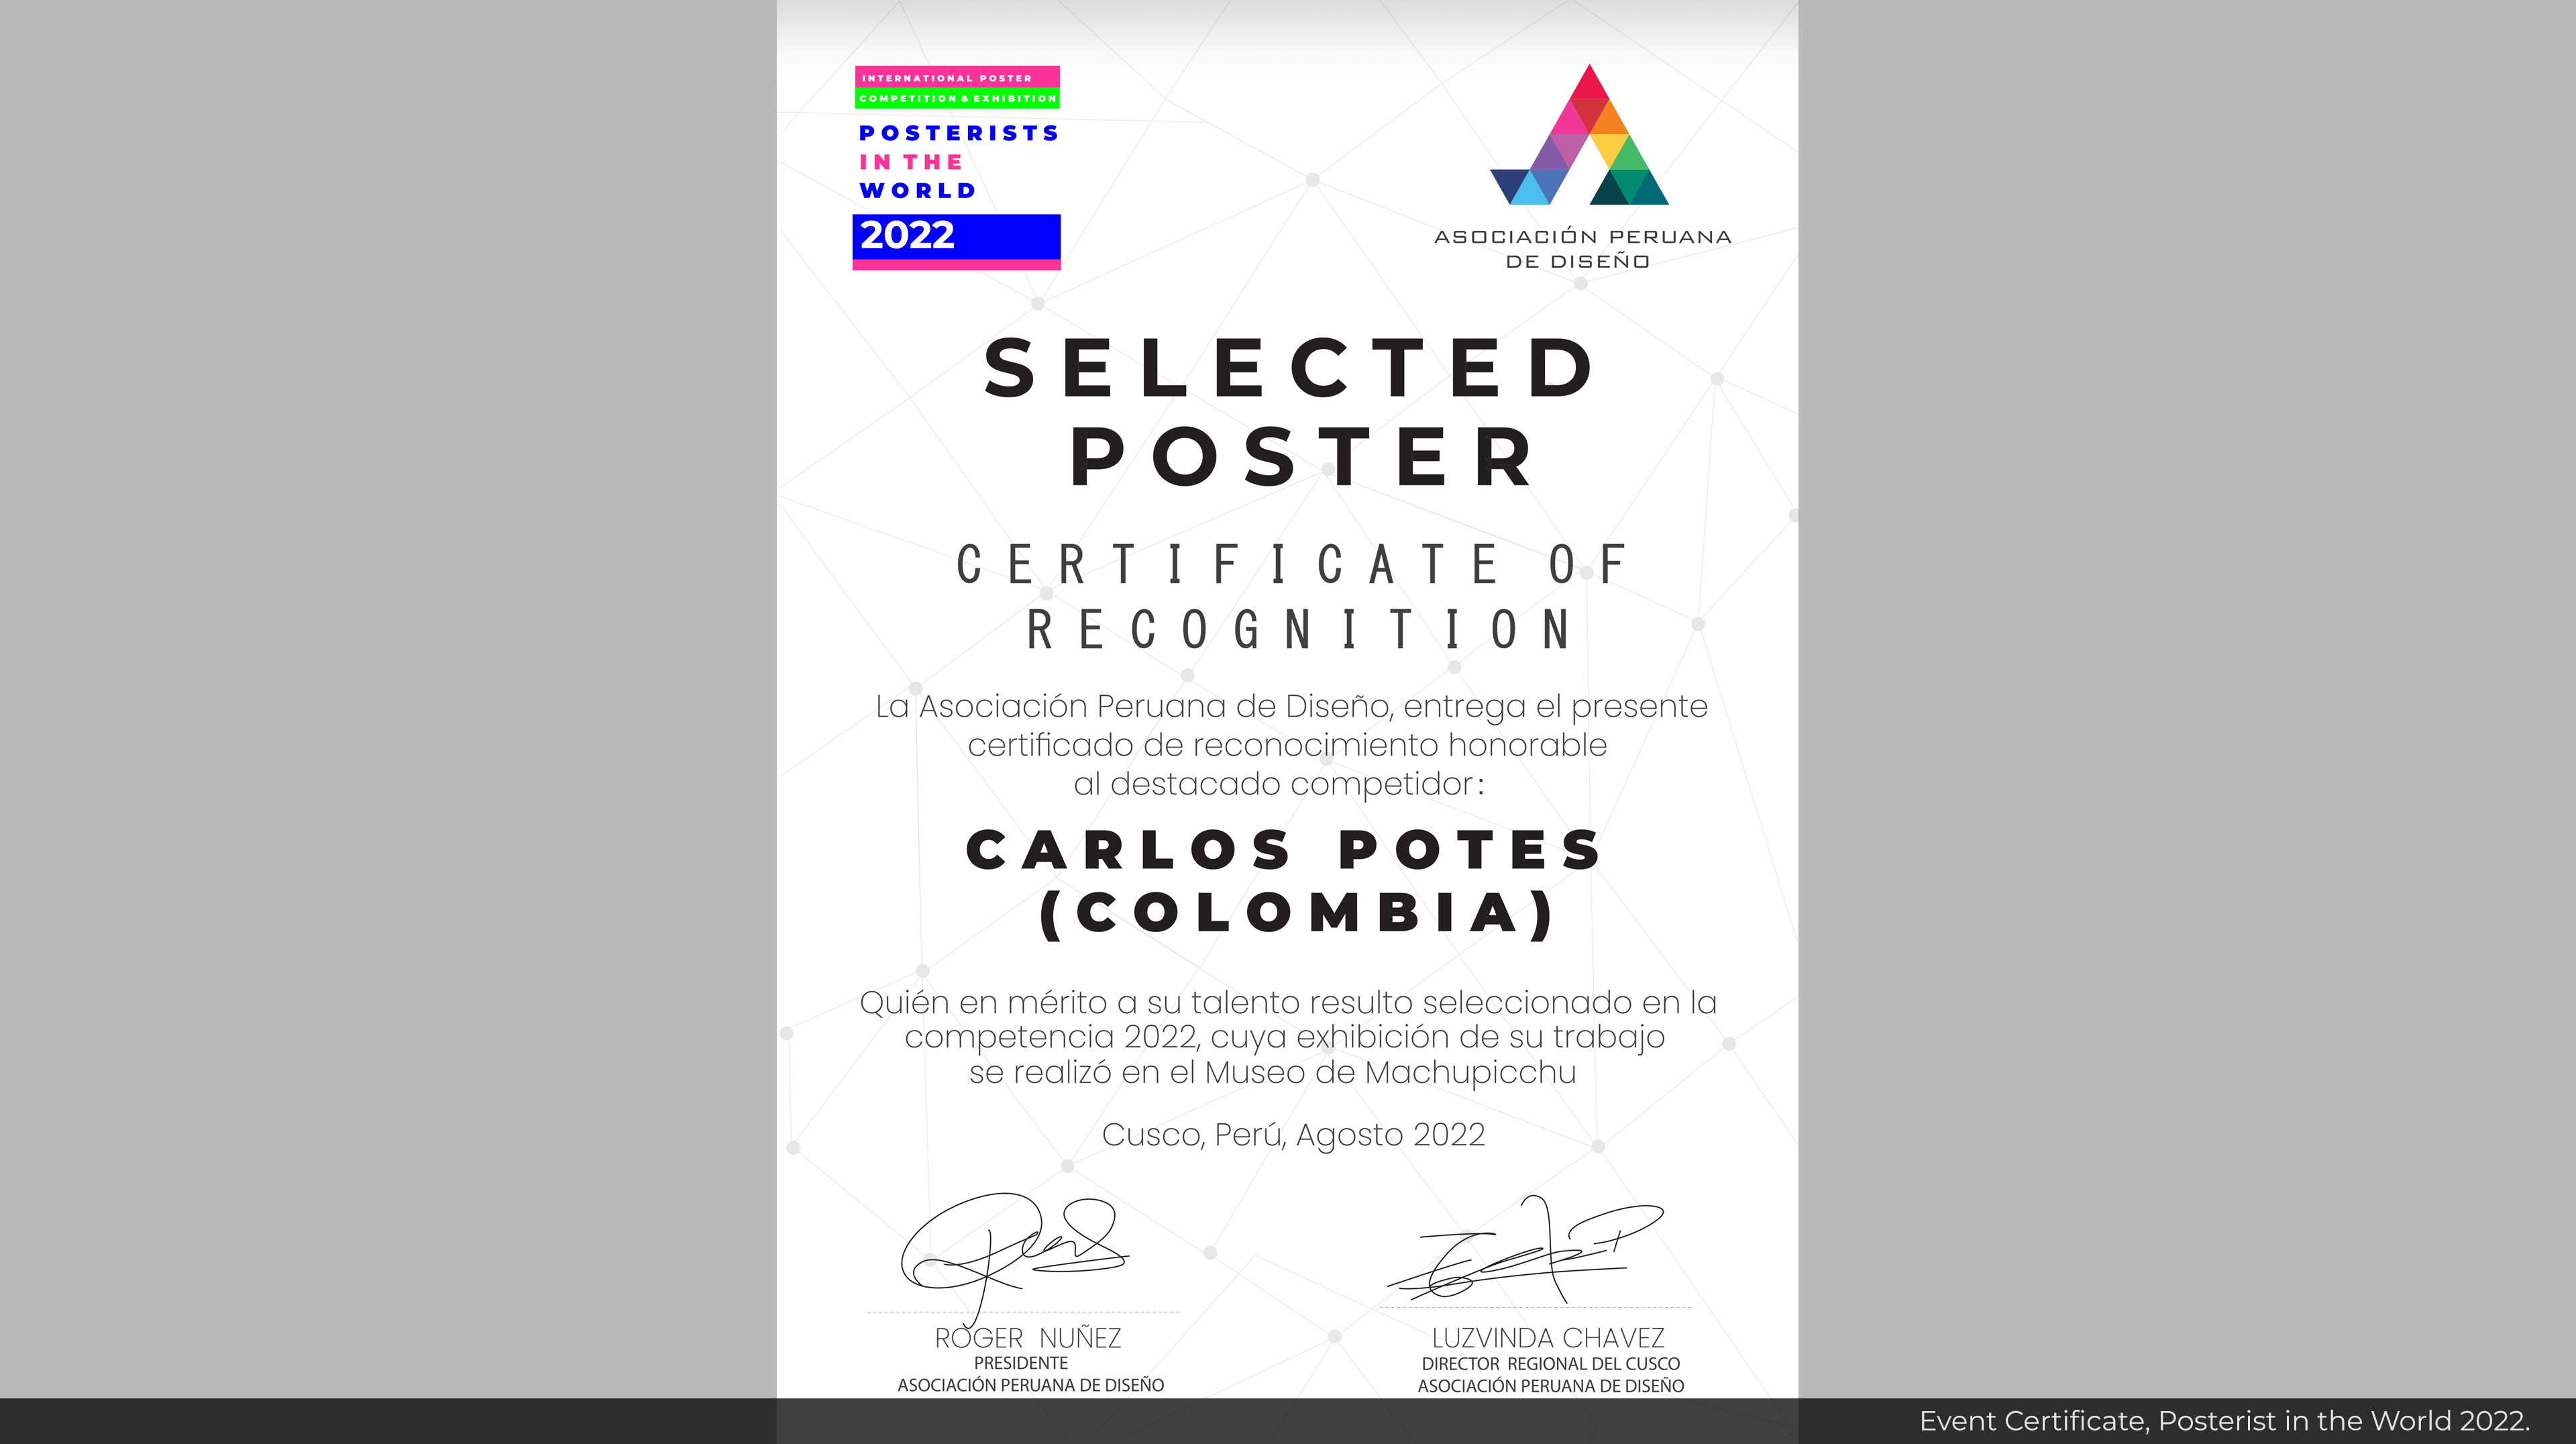 Event Certificate, Poster selected.